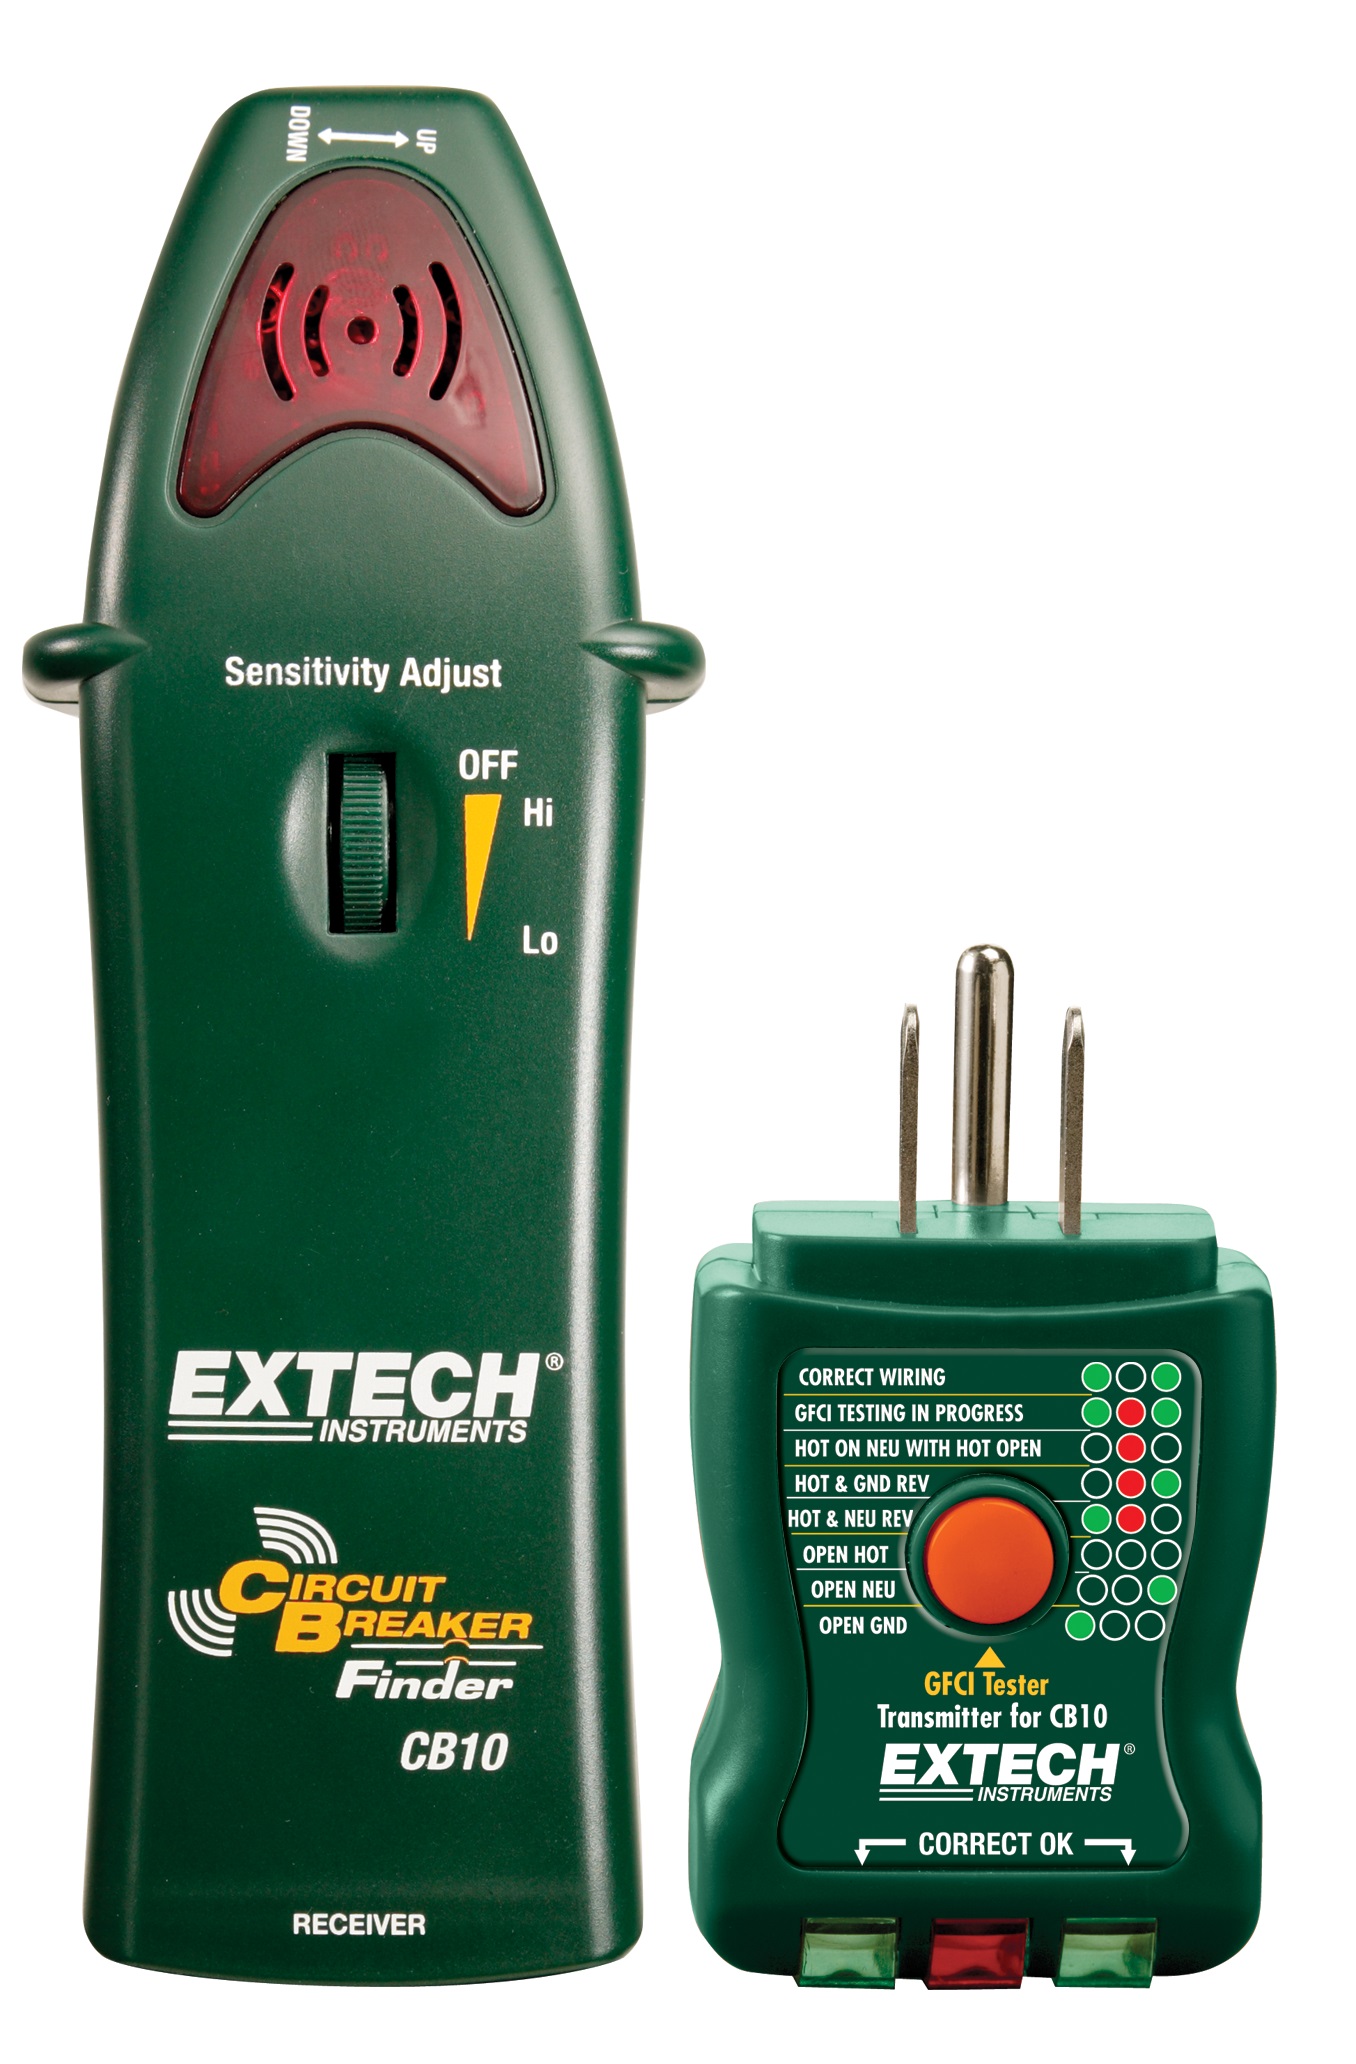 Extech CB10 AC Circuit Breaker Finder/ Receptacle Tester - Calright